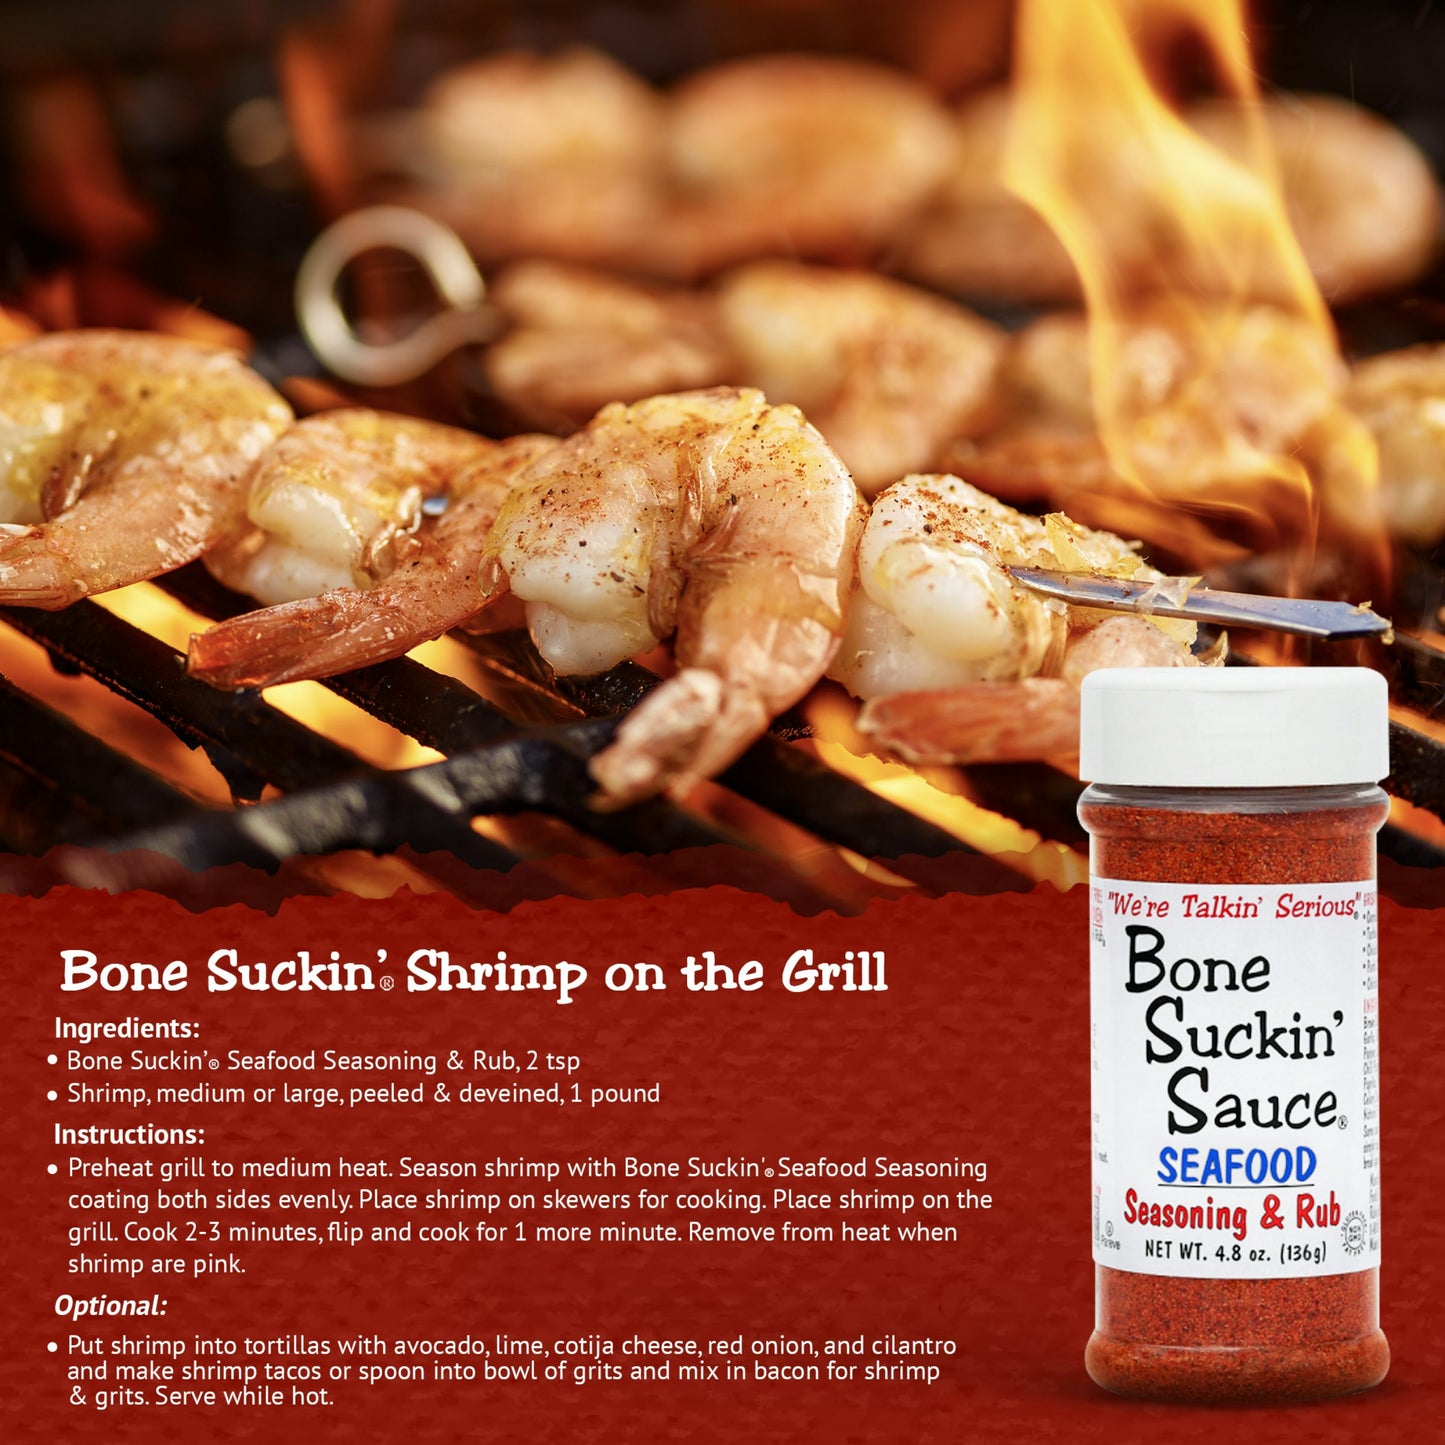 Bone Suckin' Shrimp on the Grill. Ingredients: Bone Suckin' Seafood Seasoing & Rub, 2 tsp. Shrimp, medium or large, peeled & deveined, 1 pound. Instructions: Preheat grill to medium heat. Season shrimp with Bone Suckin' Seafood Seasoning coating both sides evenly. Place shrimp on skewers for cooking. Place shrimp on grill. Cook 2-3 minutes, flip, and cook for 1 more minute. Remove from heat when shrimp are pink.